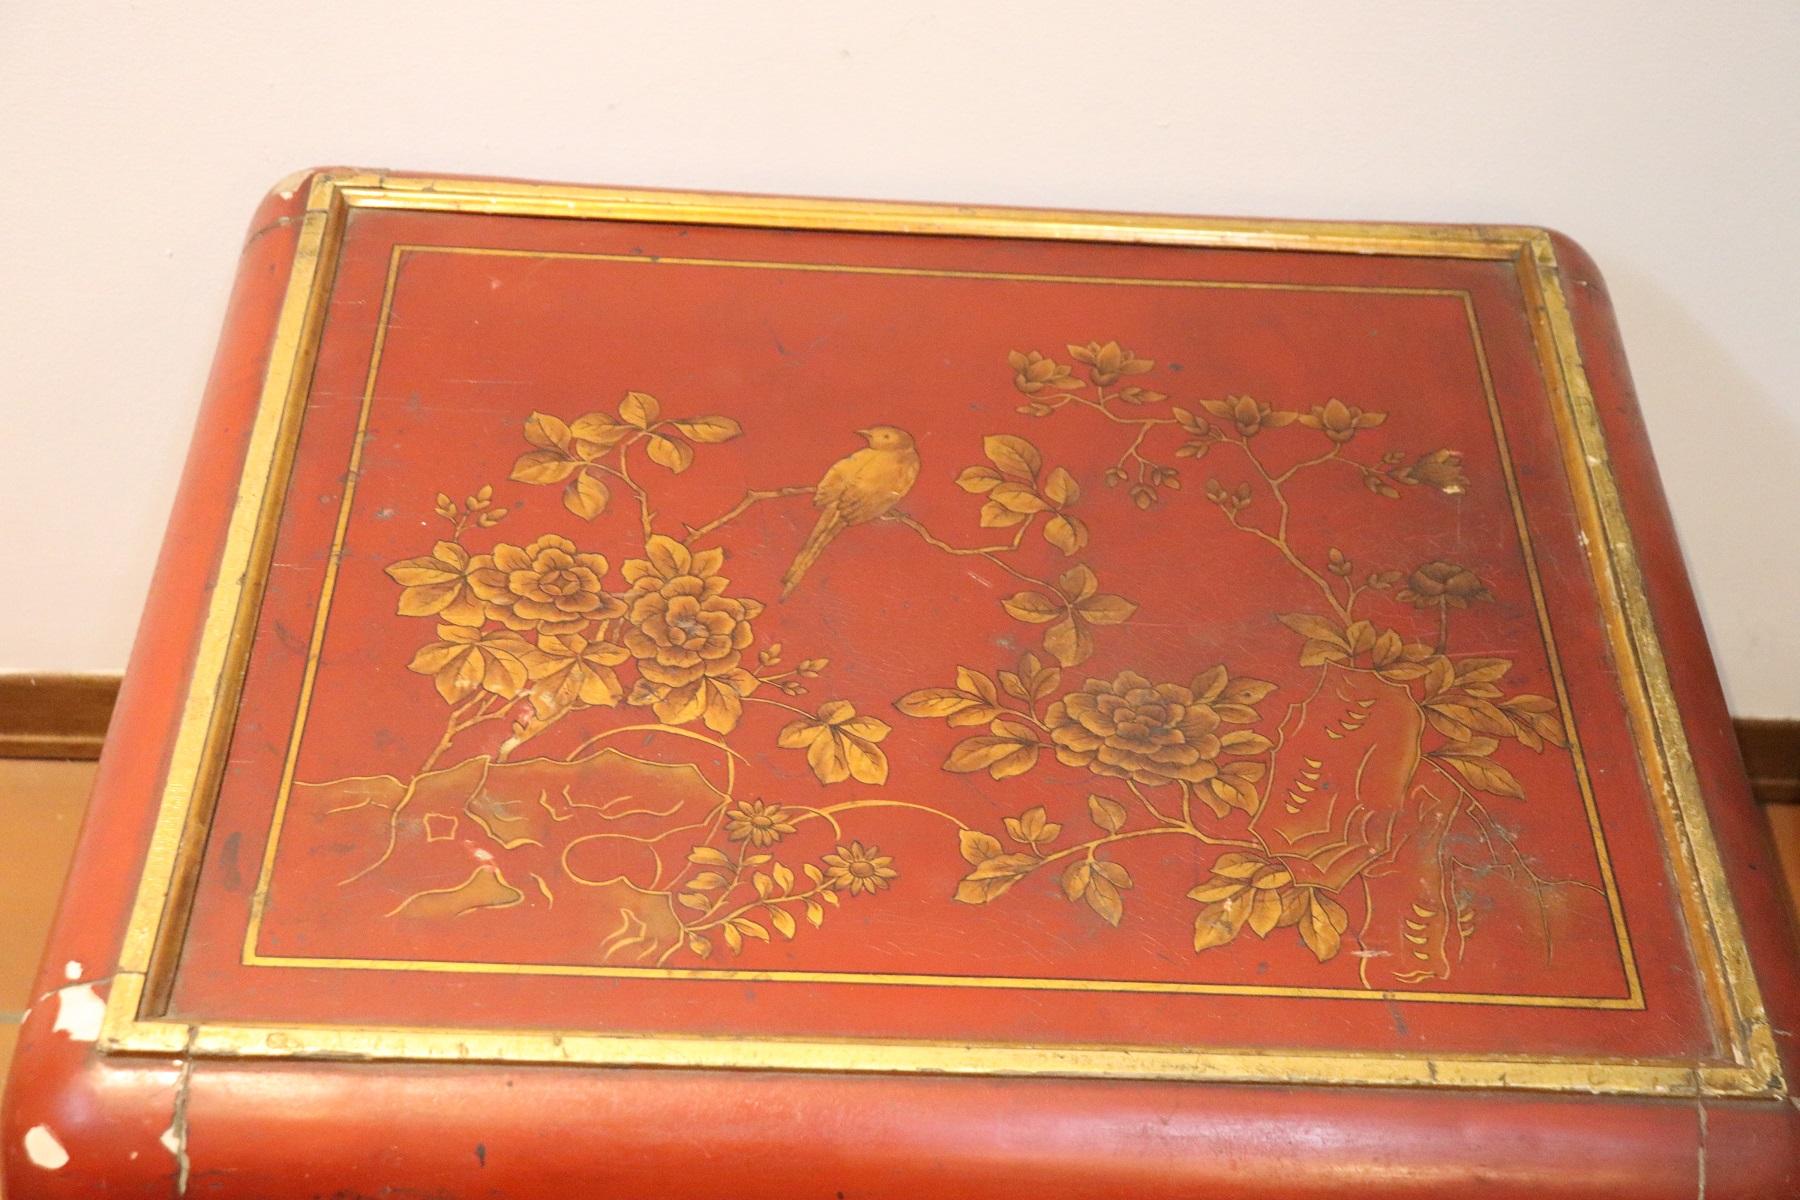 Rare and fine quality lacquered and painted wood Japanese side table or sofa table. The tables has a particular legs slender. Precious decoration in red lacquer and gold paintings in floral taste with birds. It can also be placed in the center of